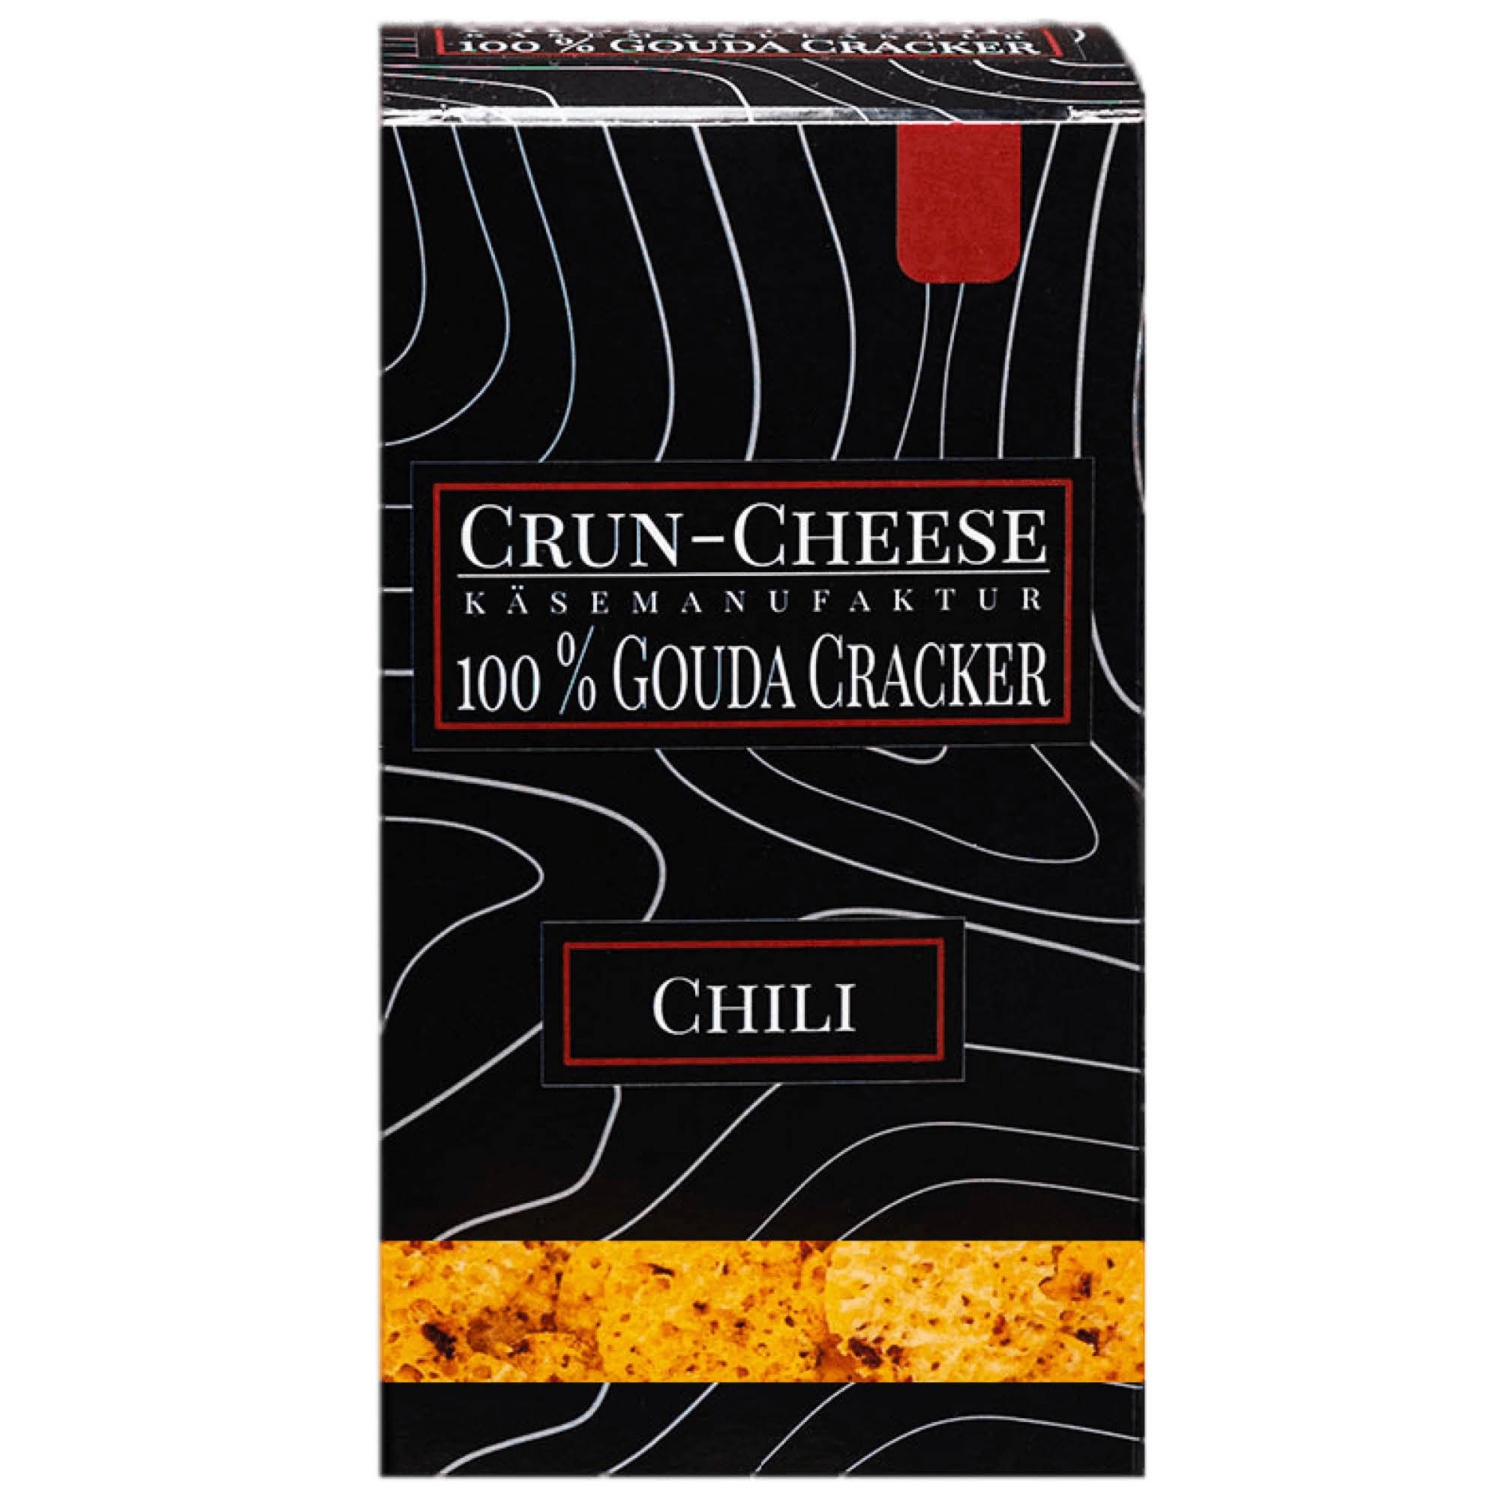 CRUN CHEESE Crackers au fromage, au piment